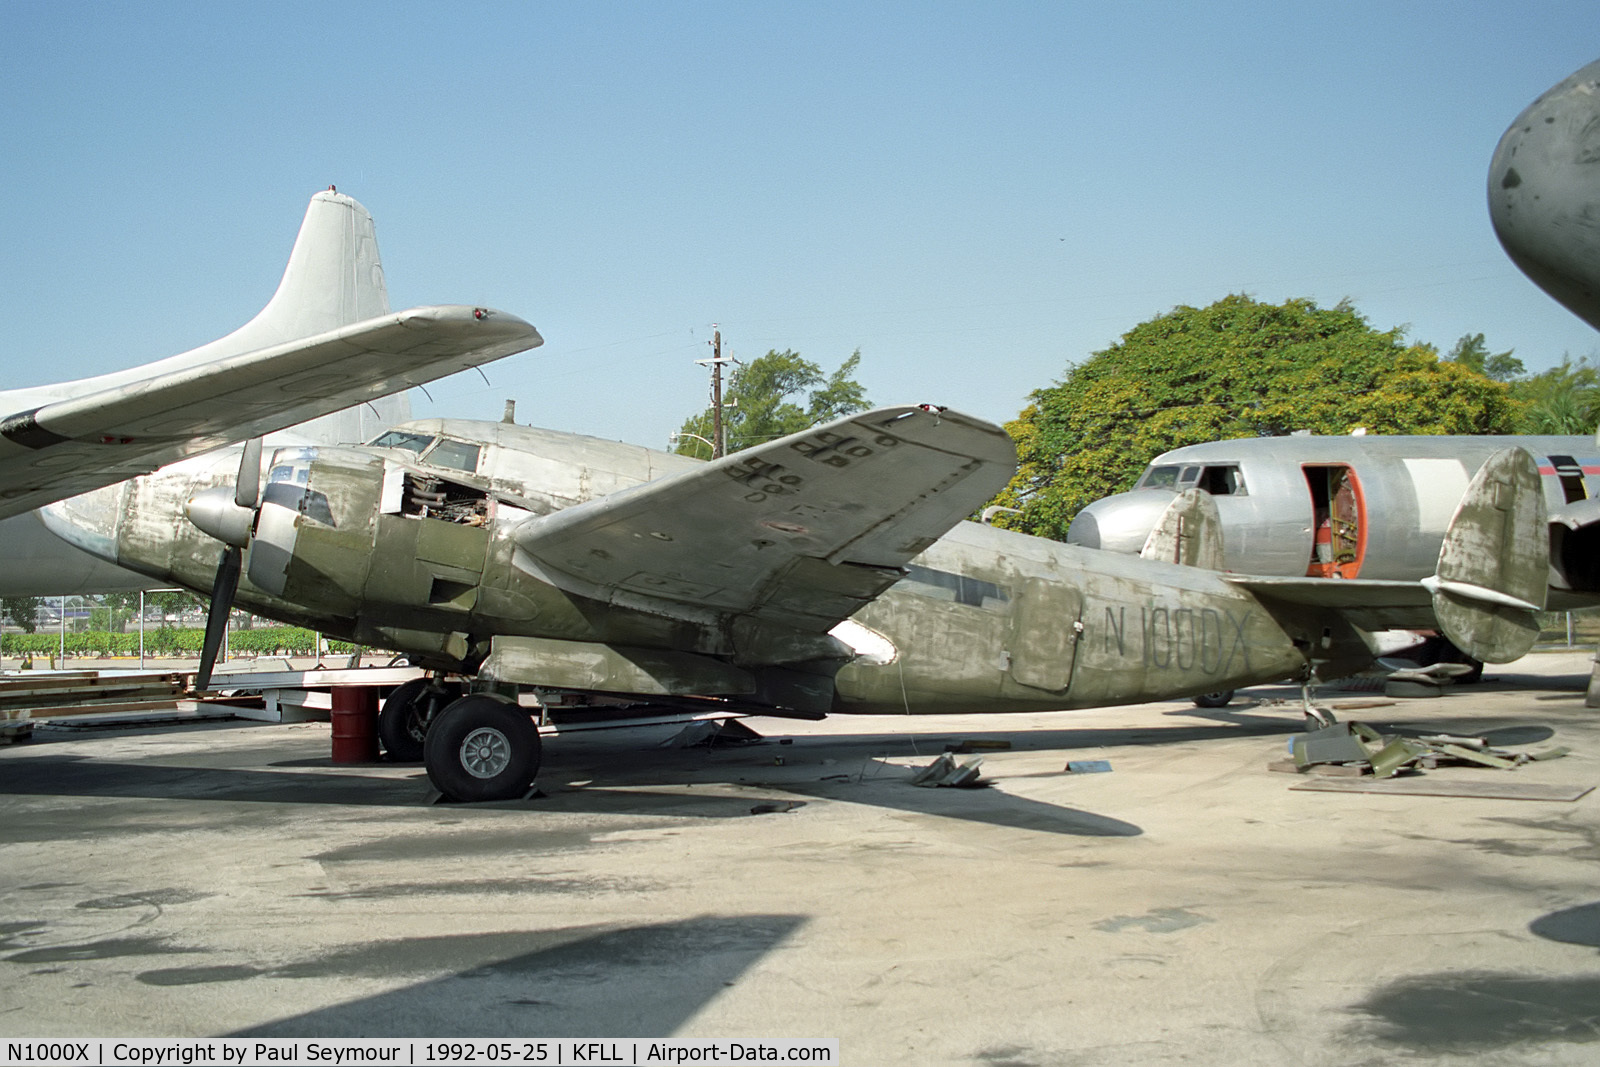 N1000X, Lockheed B-34 C/N 137-4688, In store at Fort Lauderdale International, FL. Originally USAAF 41-38032. Later moved to Sanford, FL for preservation.